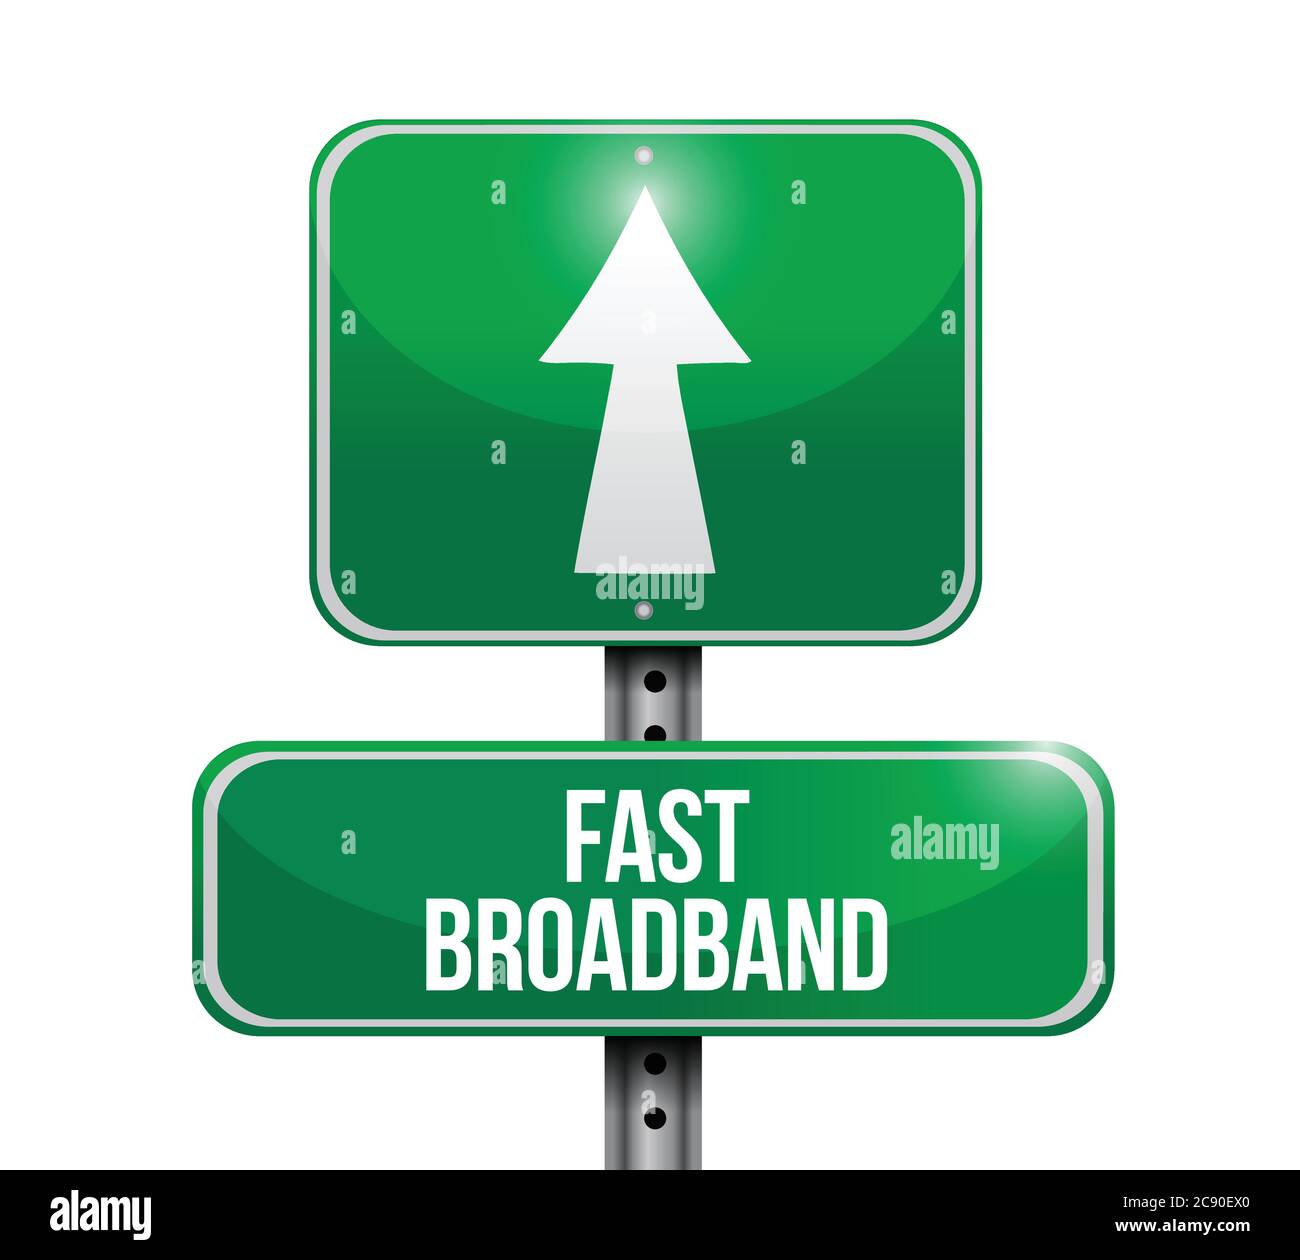 Fast broadband road sign illustrations design over a white background Stock Vector